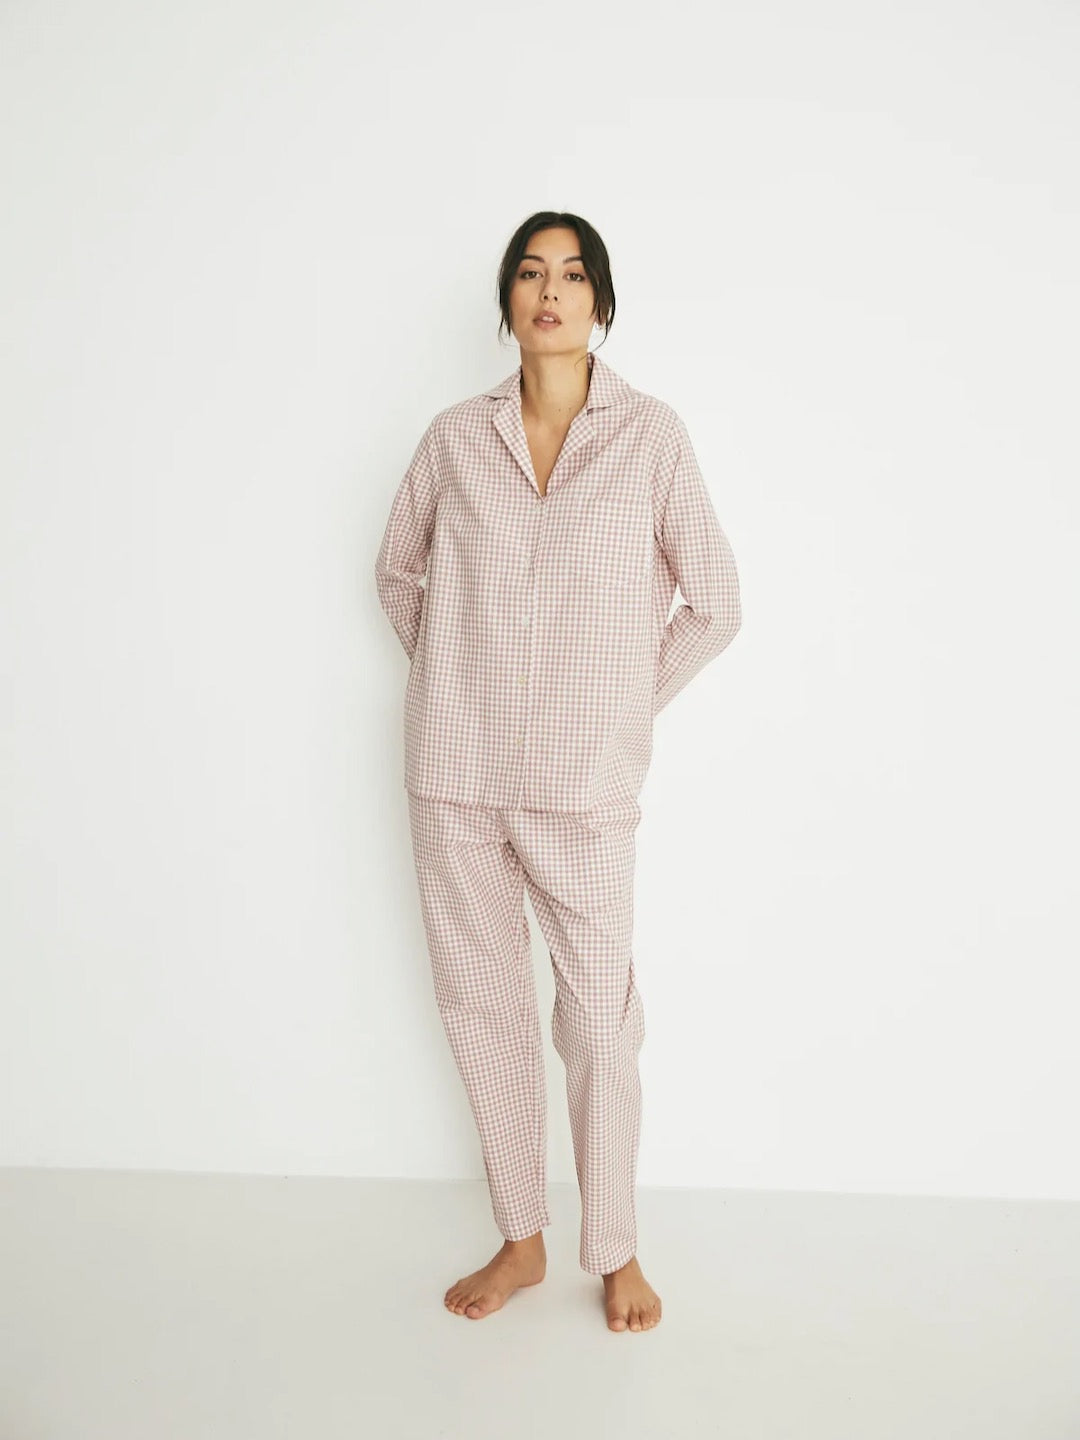 The model is wearing a Classic Set - Rose Gingham pyjama set by general sleep.